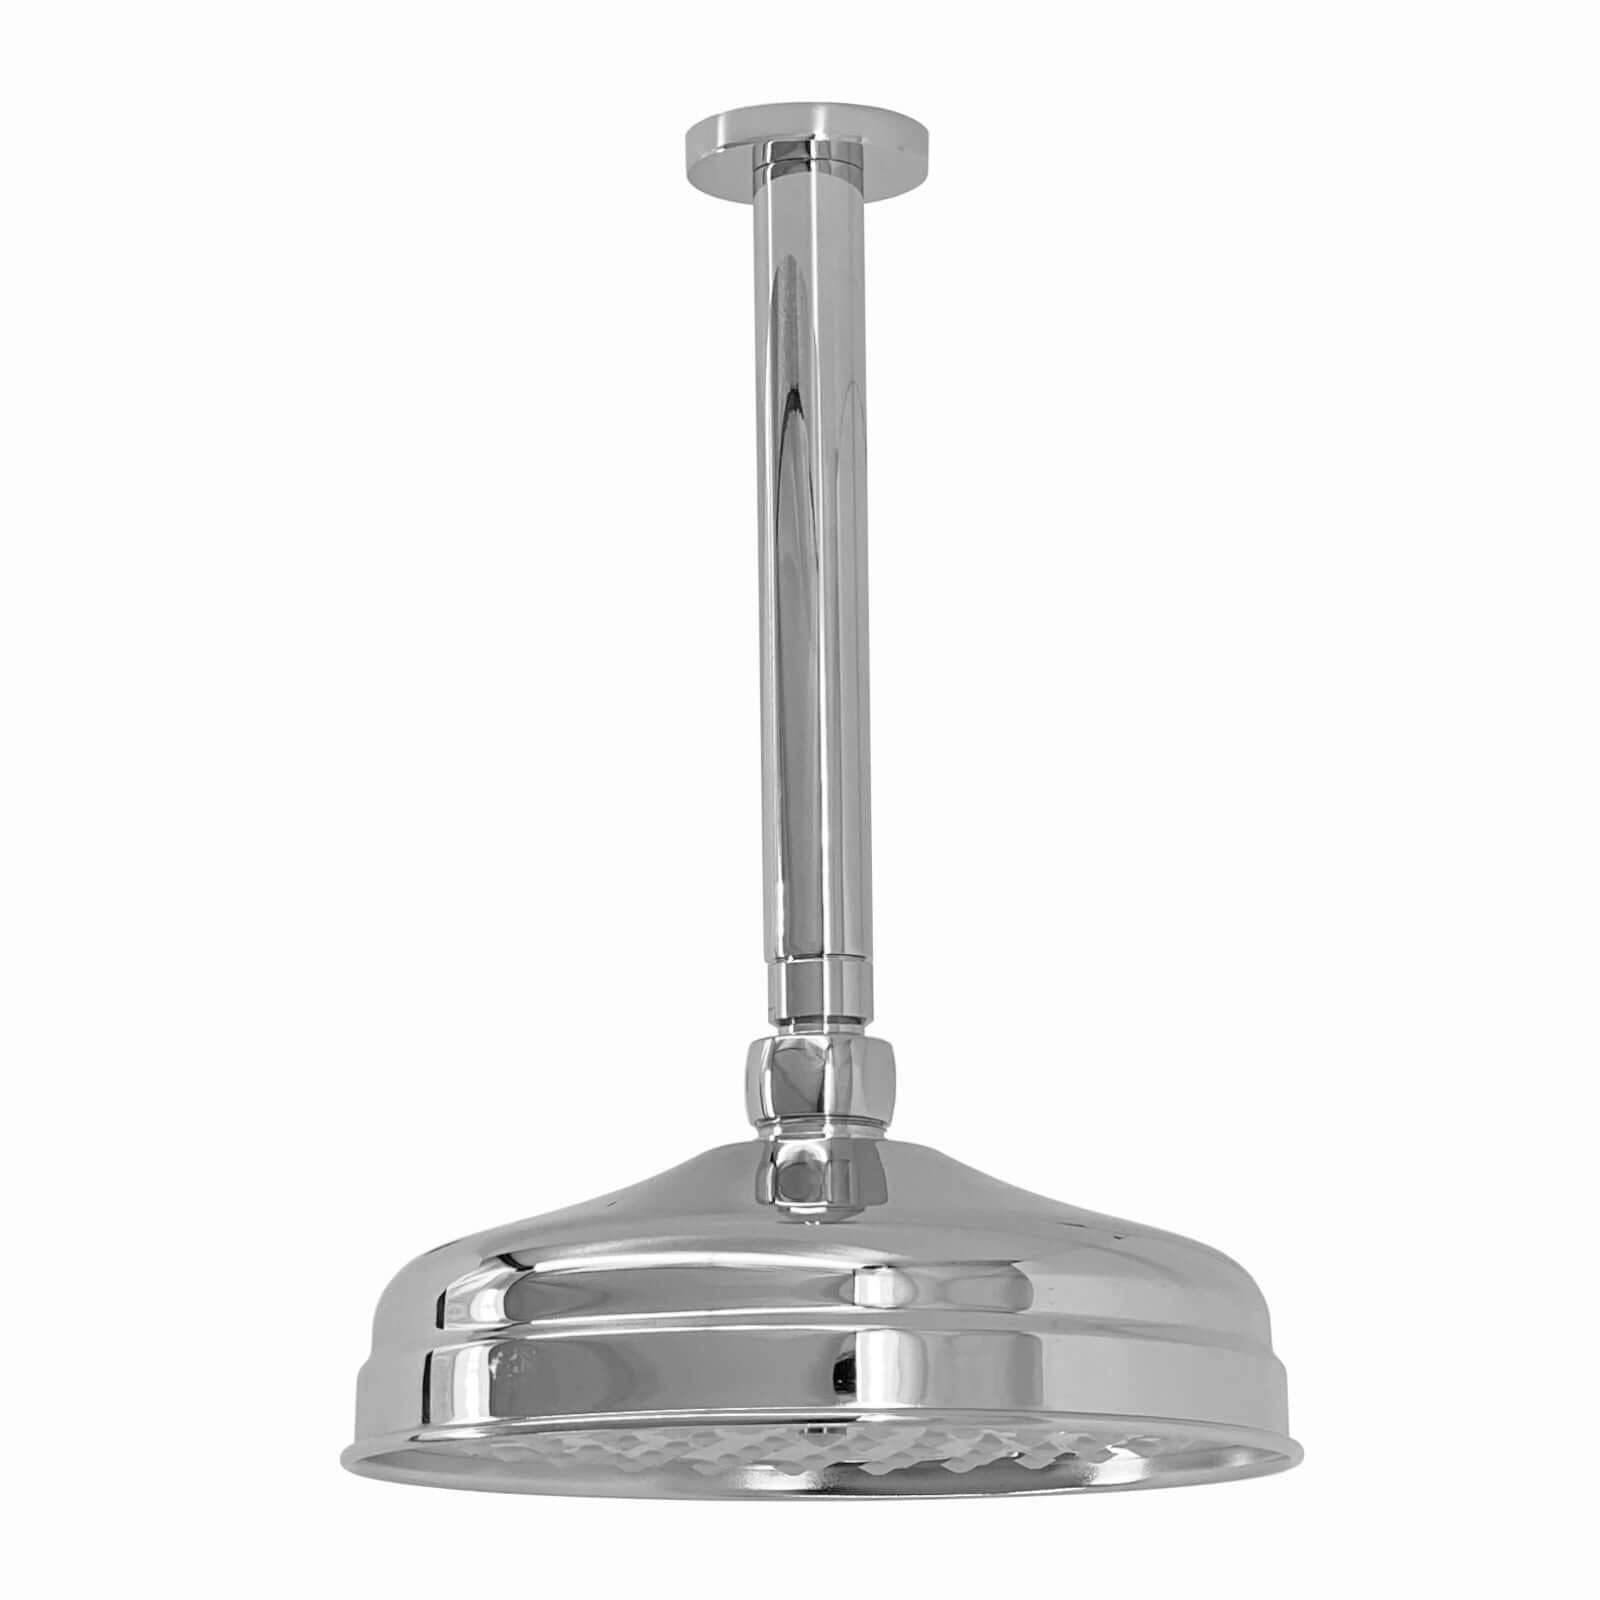 SH0257-03-RA044-01-traditional-ceiling-fixed-apron-brass-shower-head-8-with-180mm-ceiling-shower-arm-chrome